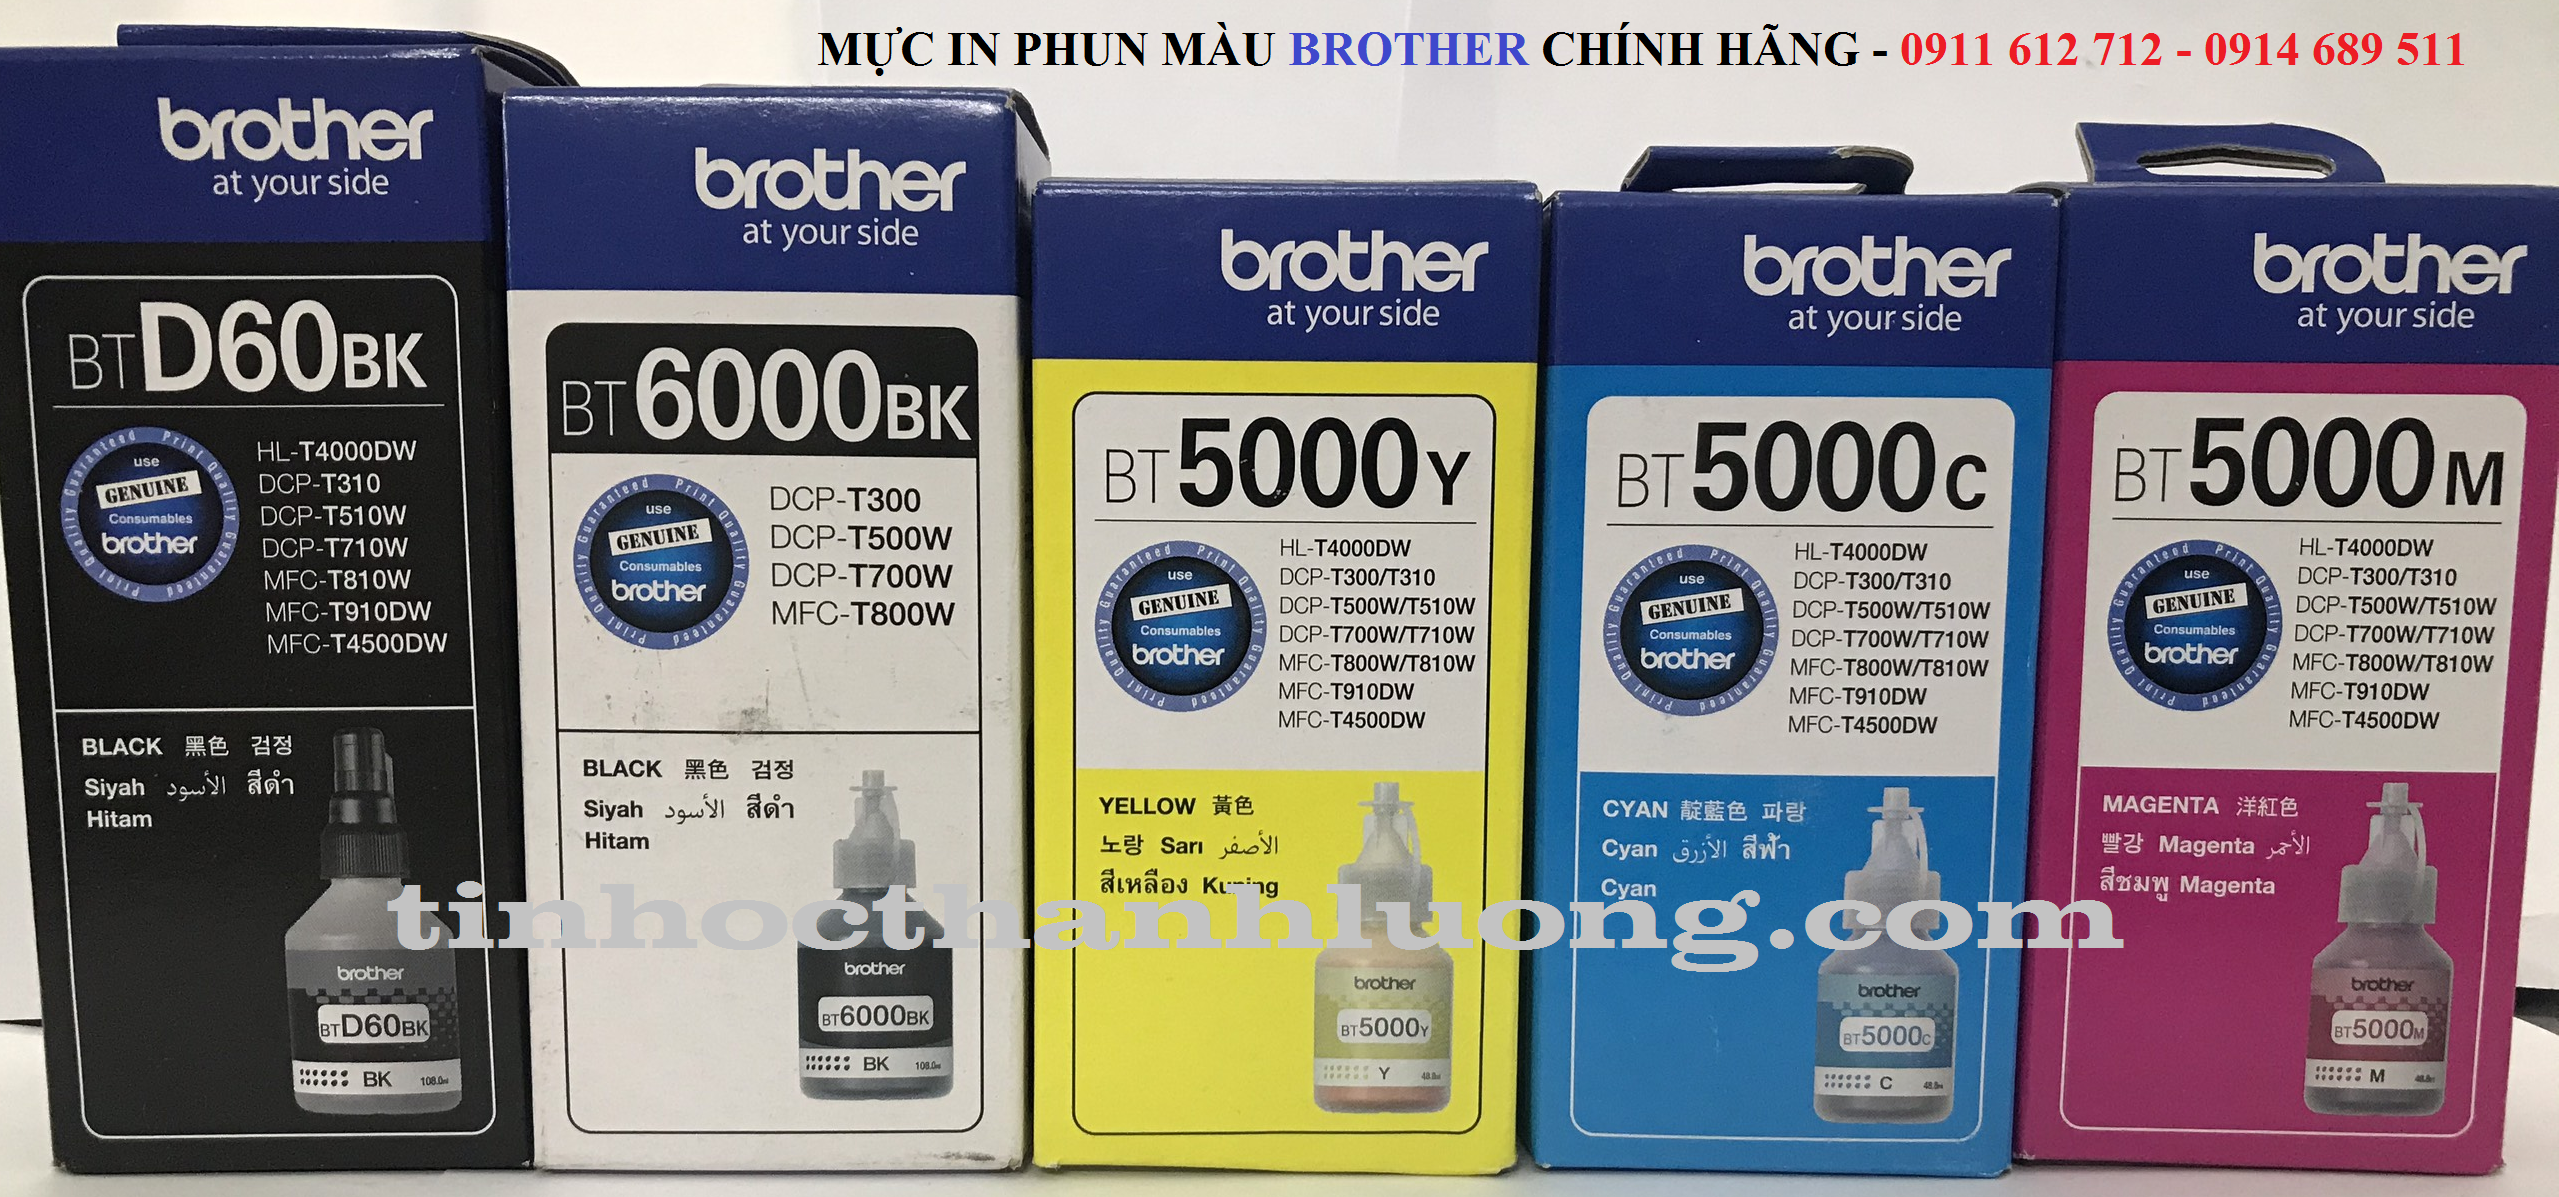 mực in brother bt6000